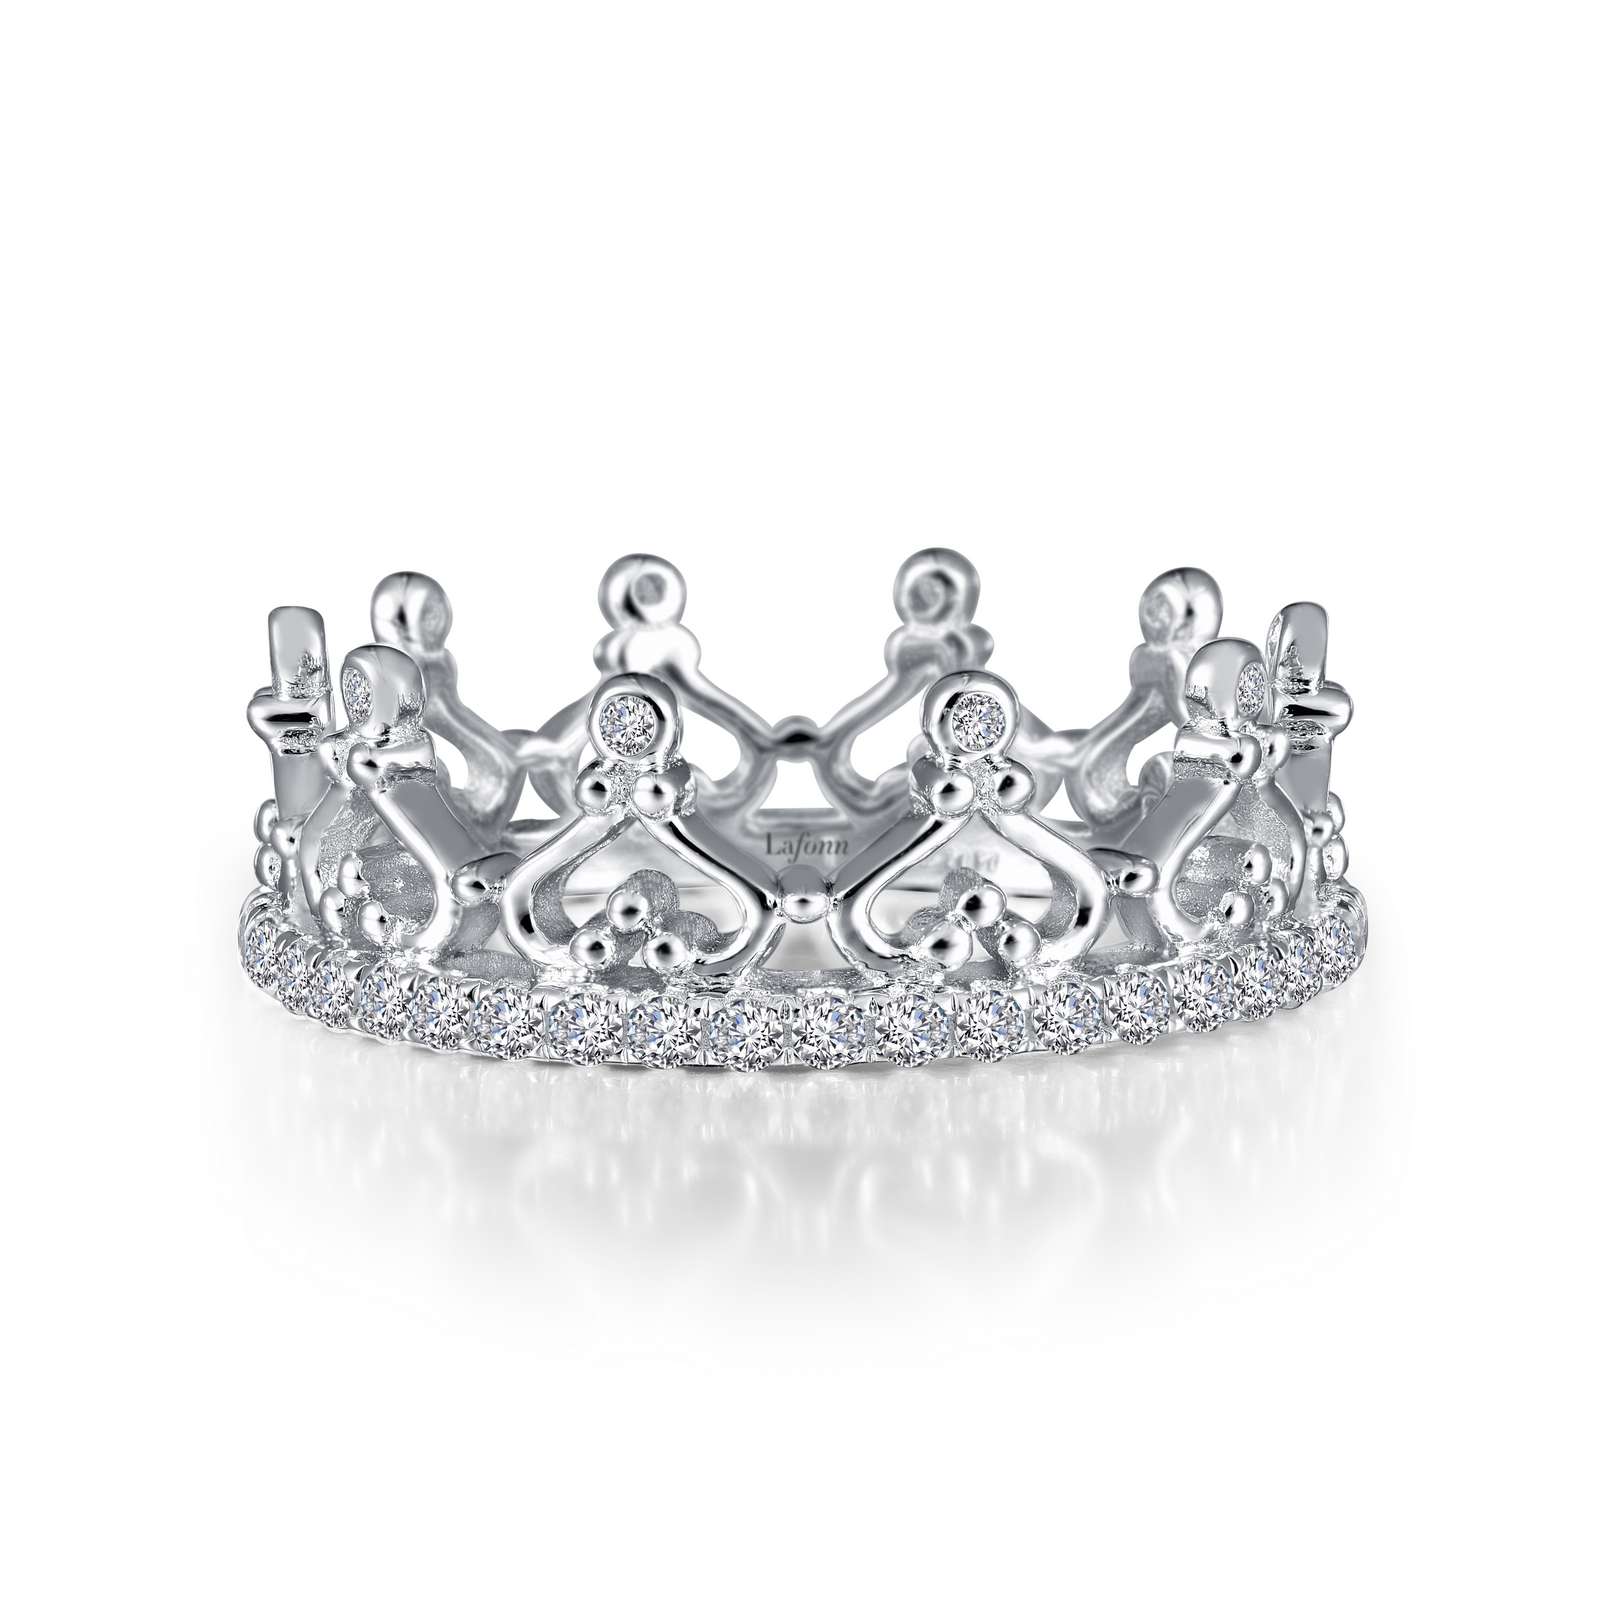 Crown Eternity Ring Griner Jewelry Co. Moultrie, GA